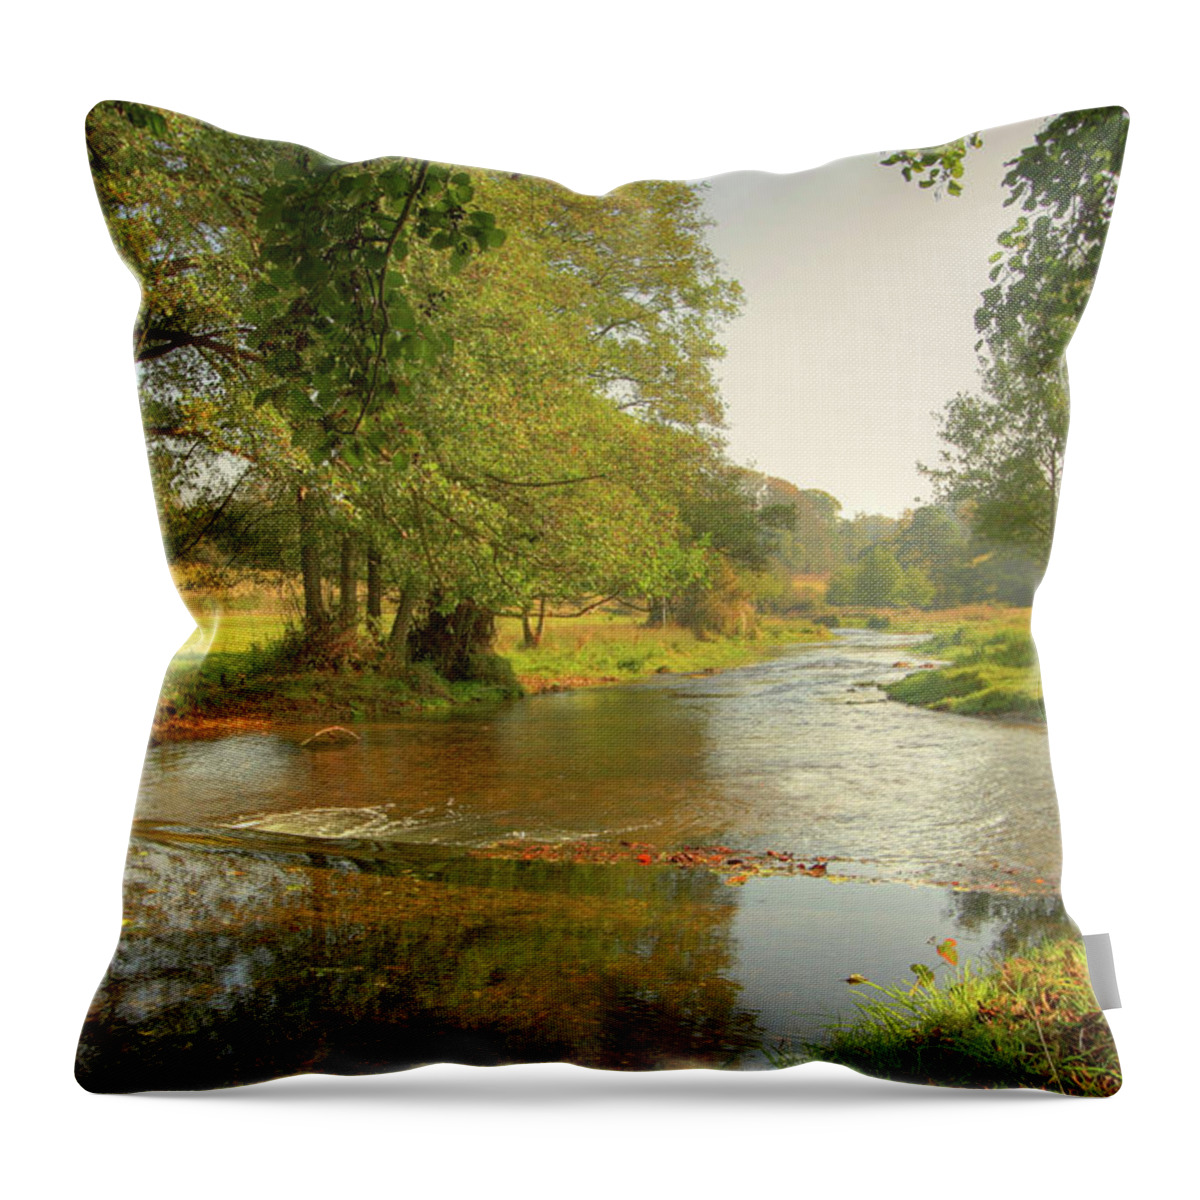 Tranquility Throw Pillow featuring the photograph The River Mimram At Tewin by Photo By Roger Cave